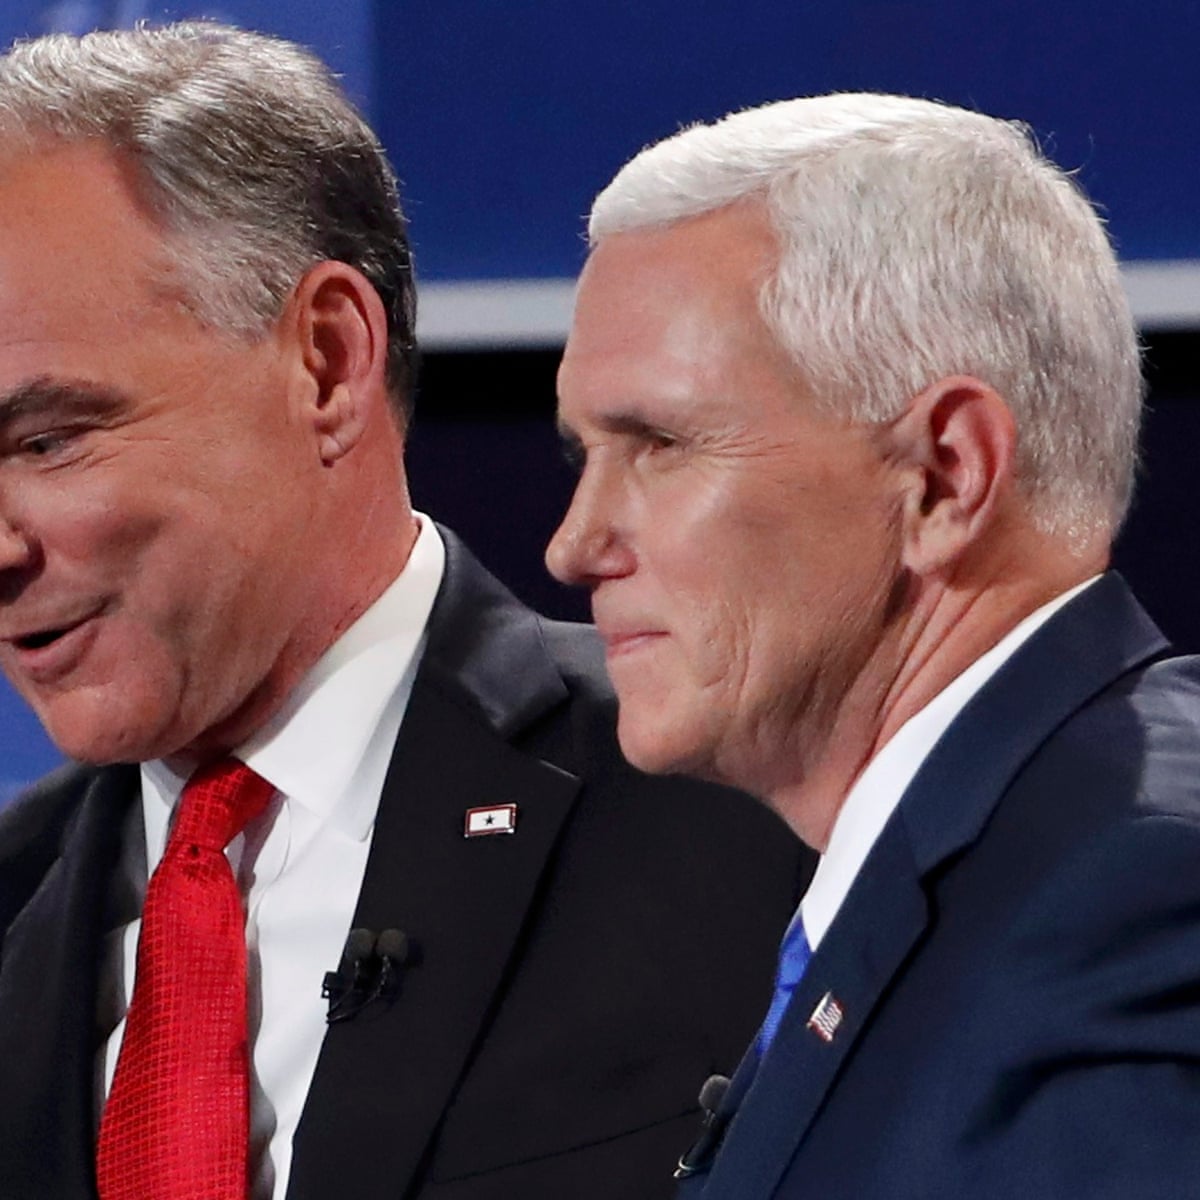 følelse loyalitet Få Tim Kaine shouldn't try standup – and other things we learned at the VP  debate | US elections 2016 | The Guardian